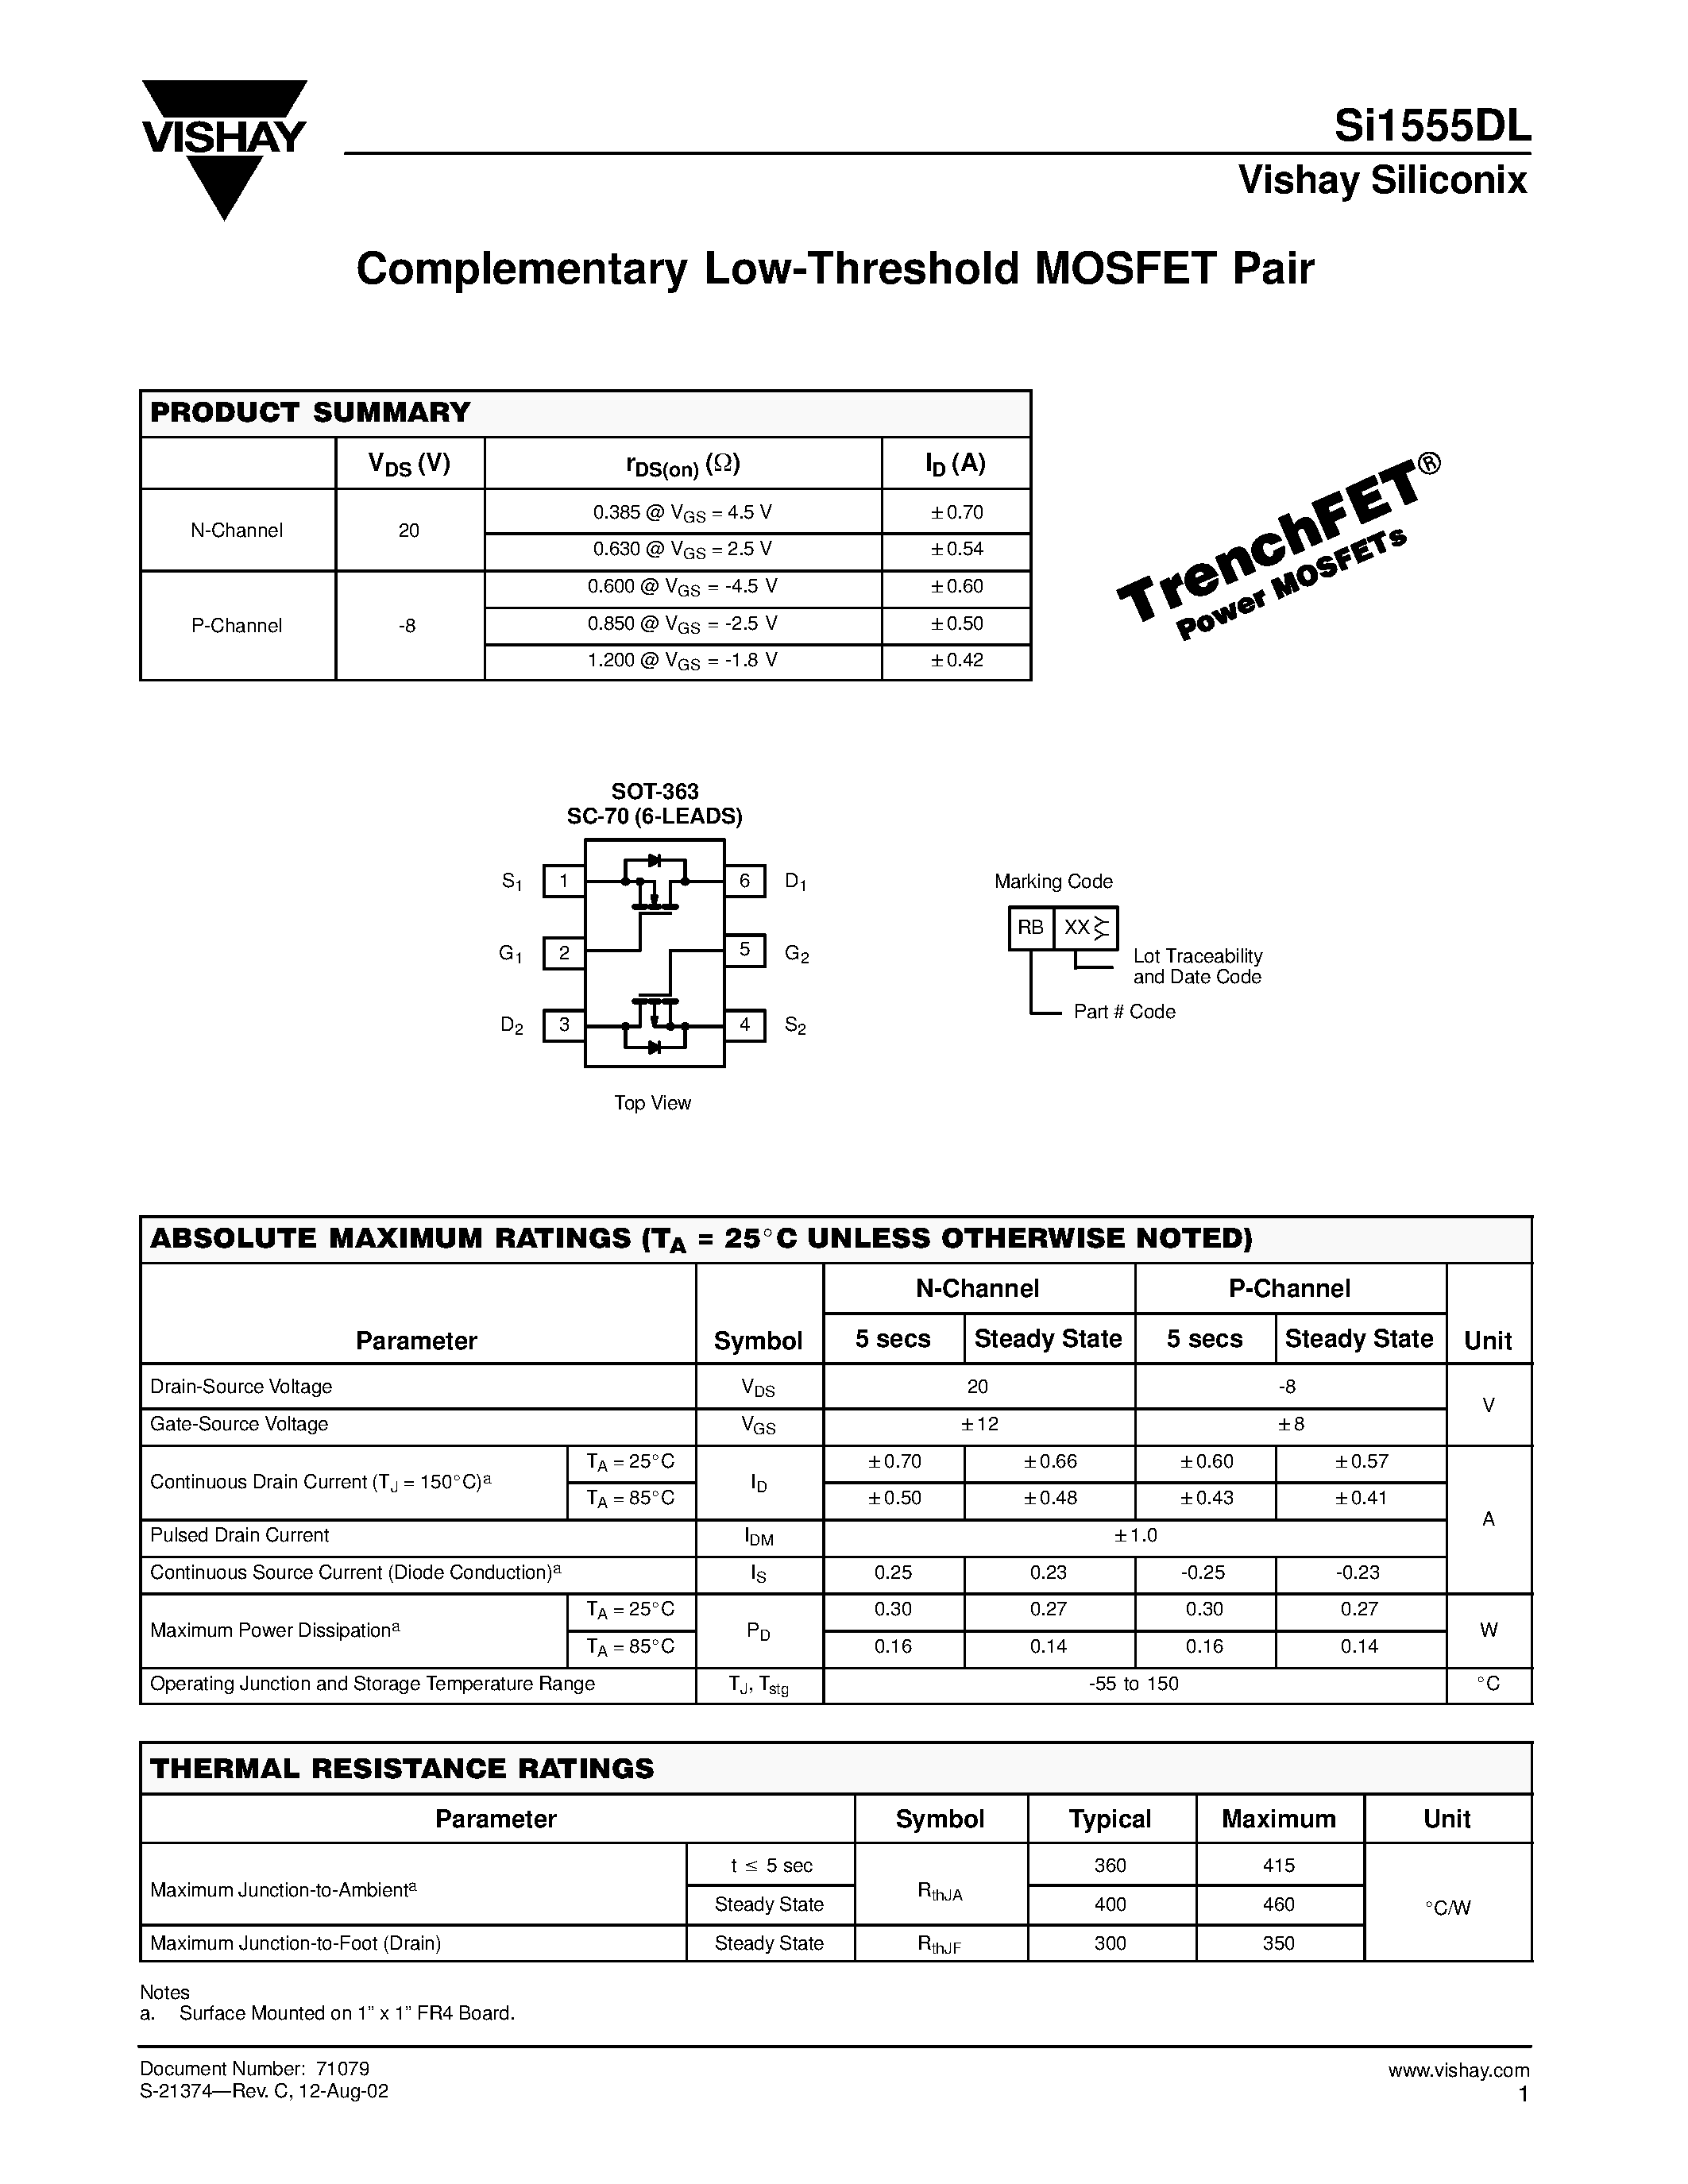 Даташит SI1555DL - Complementary Low-Threshold MOSFET Pair страница 1